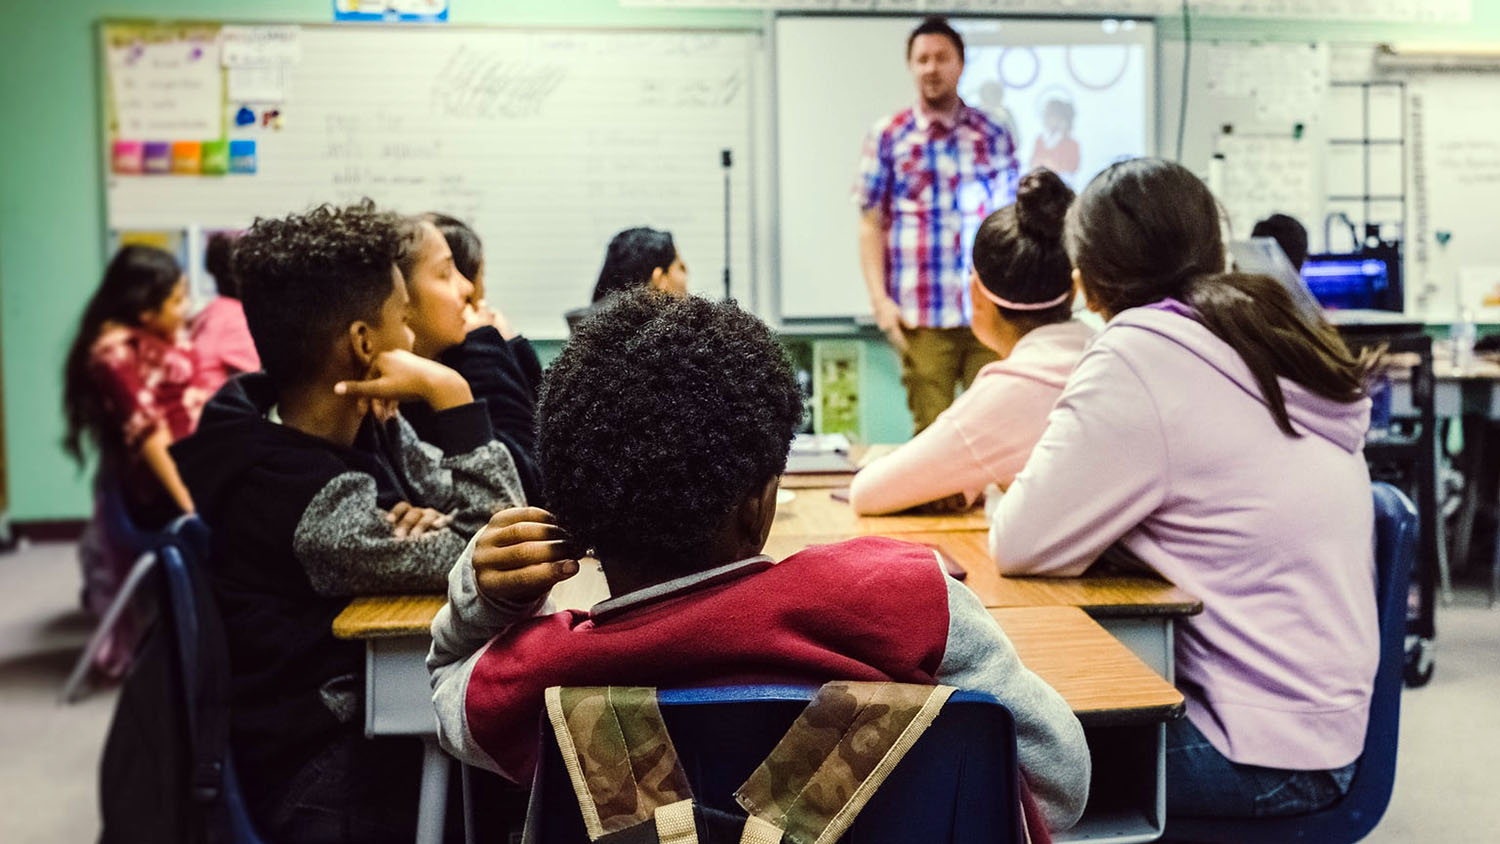 A multicultural mix of middle school students listen to a teacher in a classroom.